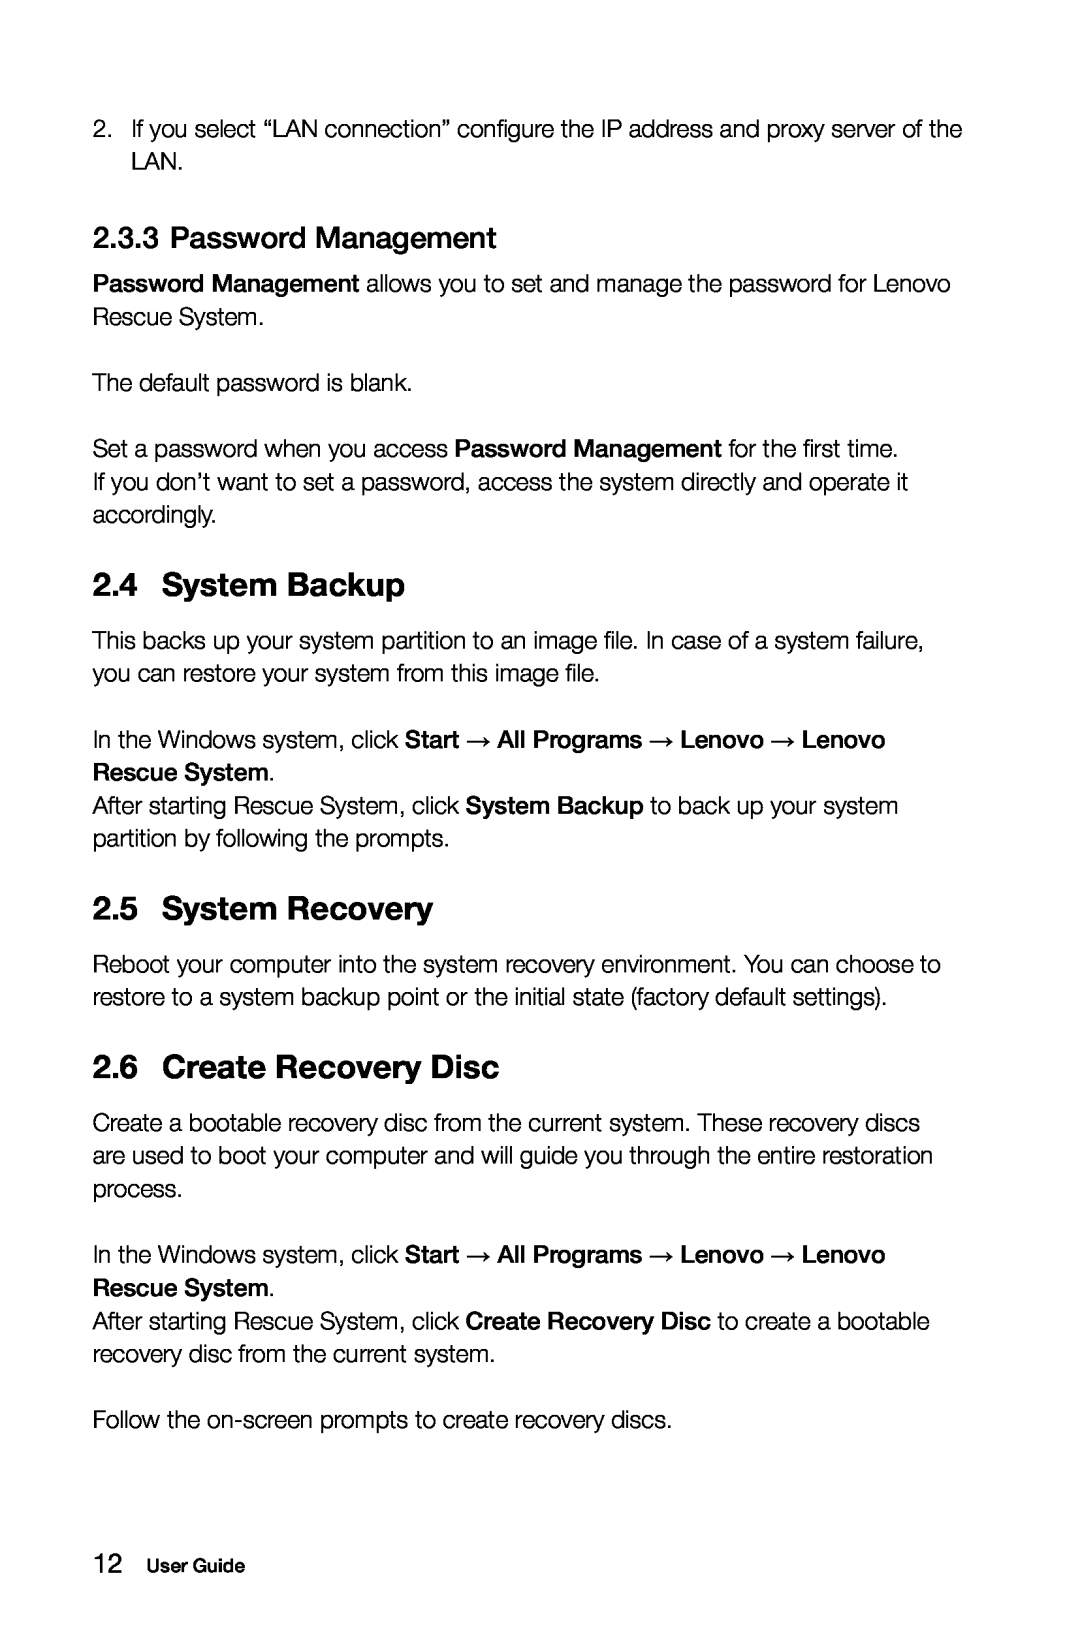 Lenovo H5S manual System Backup, System Recovery, Create Recovery Disc, Password Management 